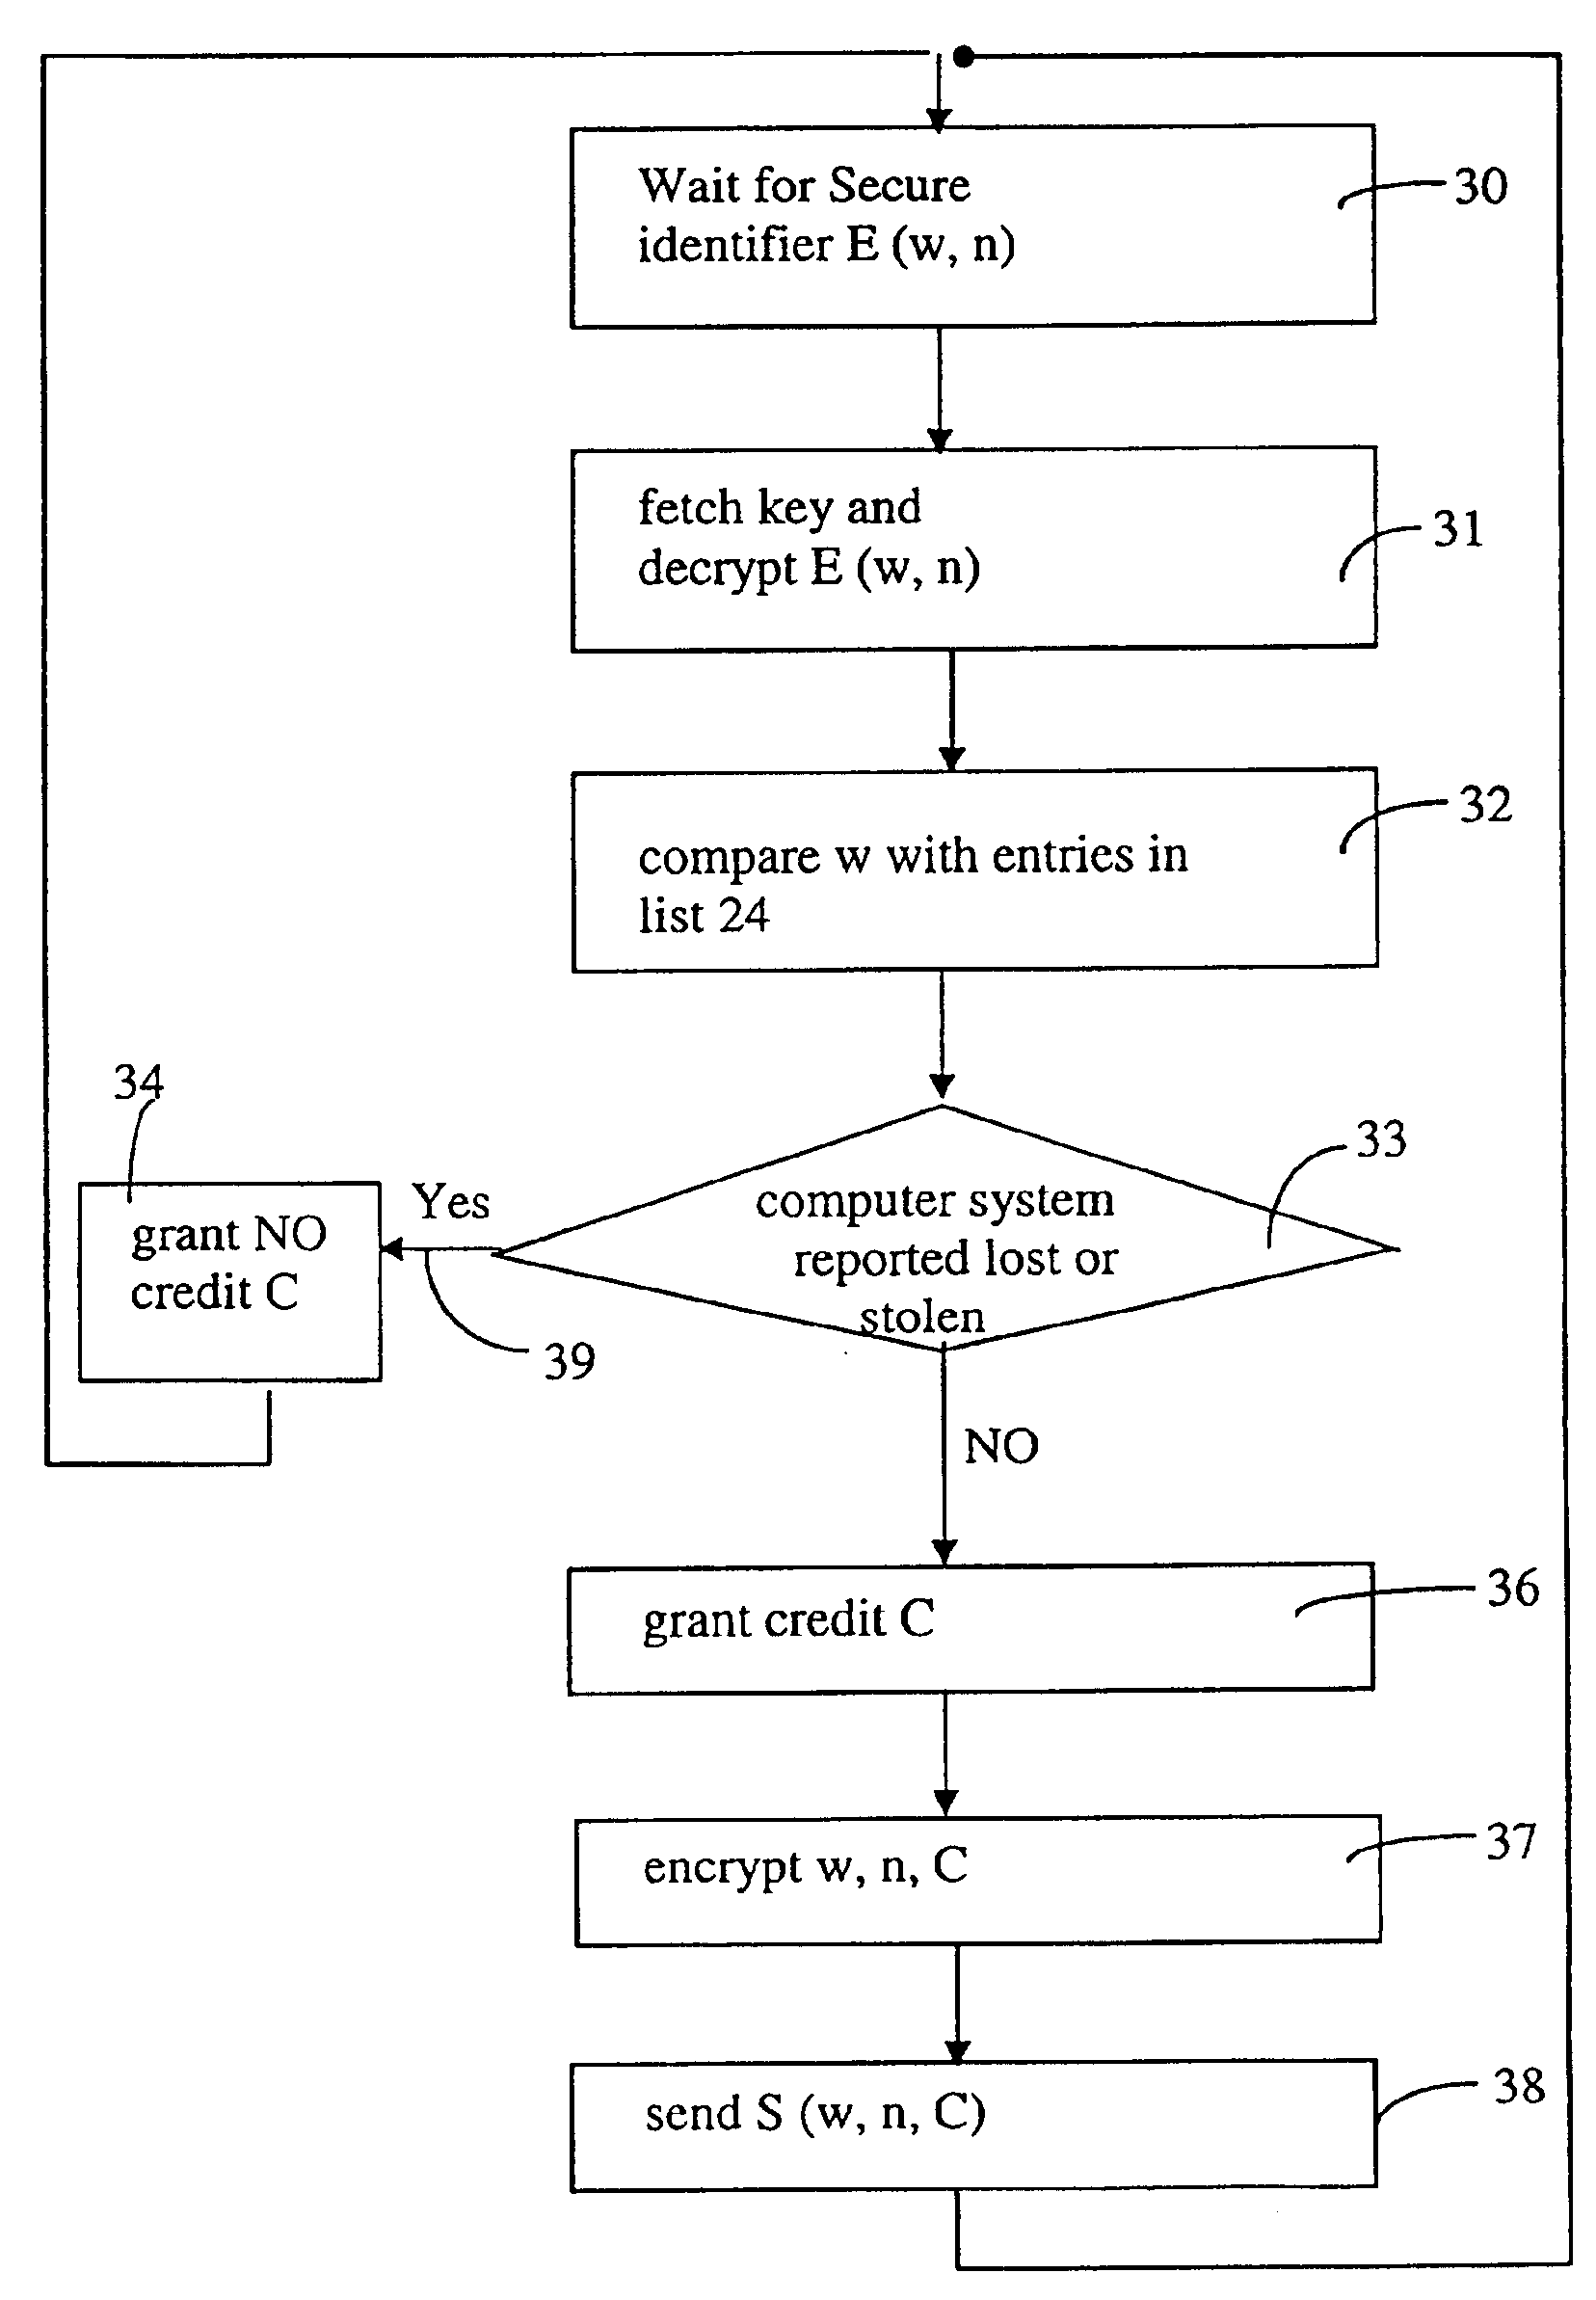 Scheme for blocking the use of lost or stolen network-connectable computer systems